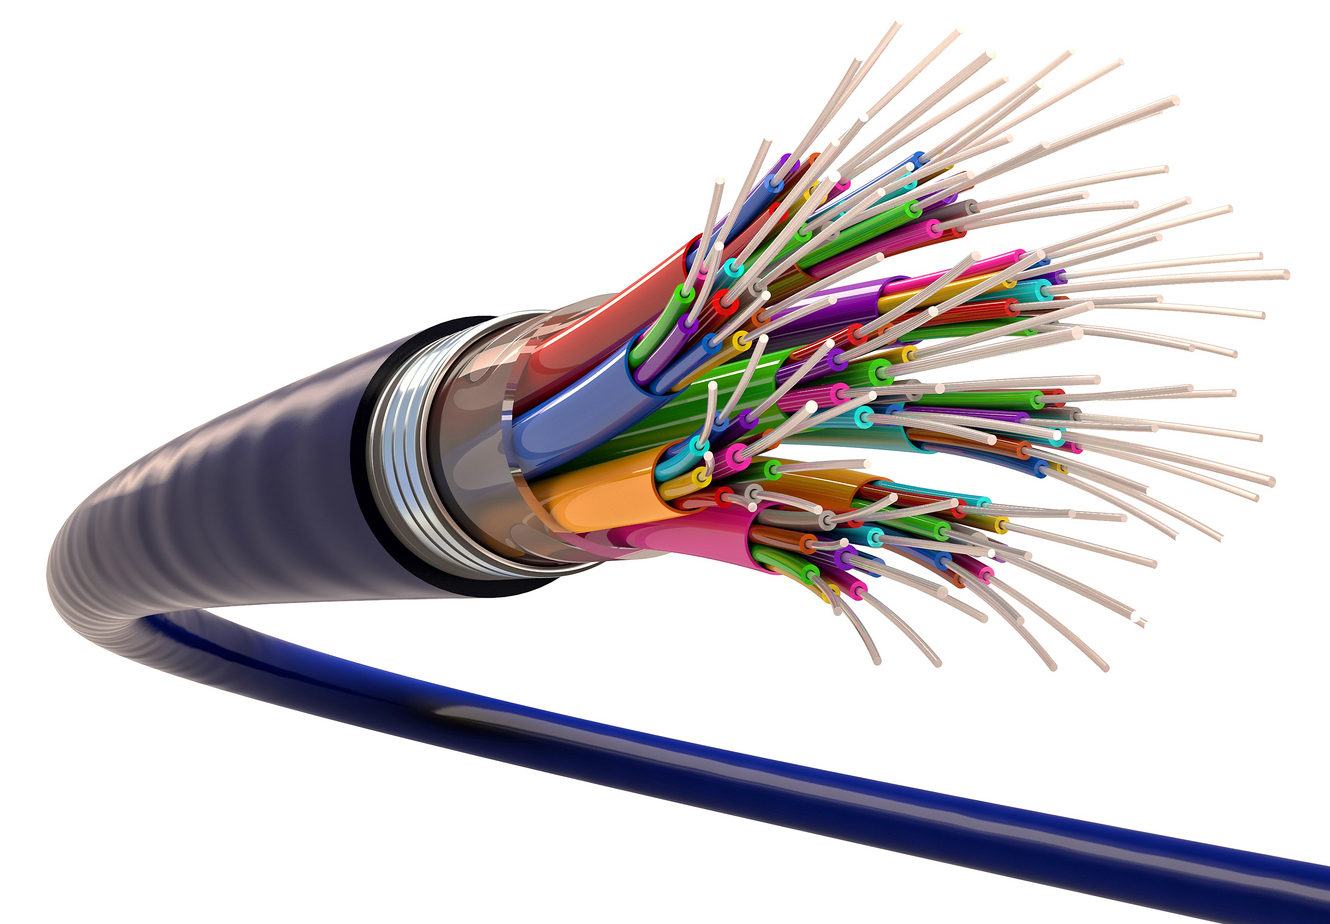 3d image of optical fiber cable